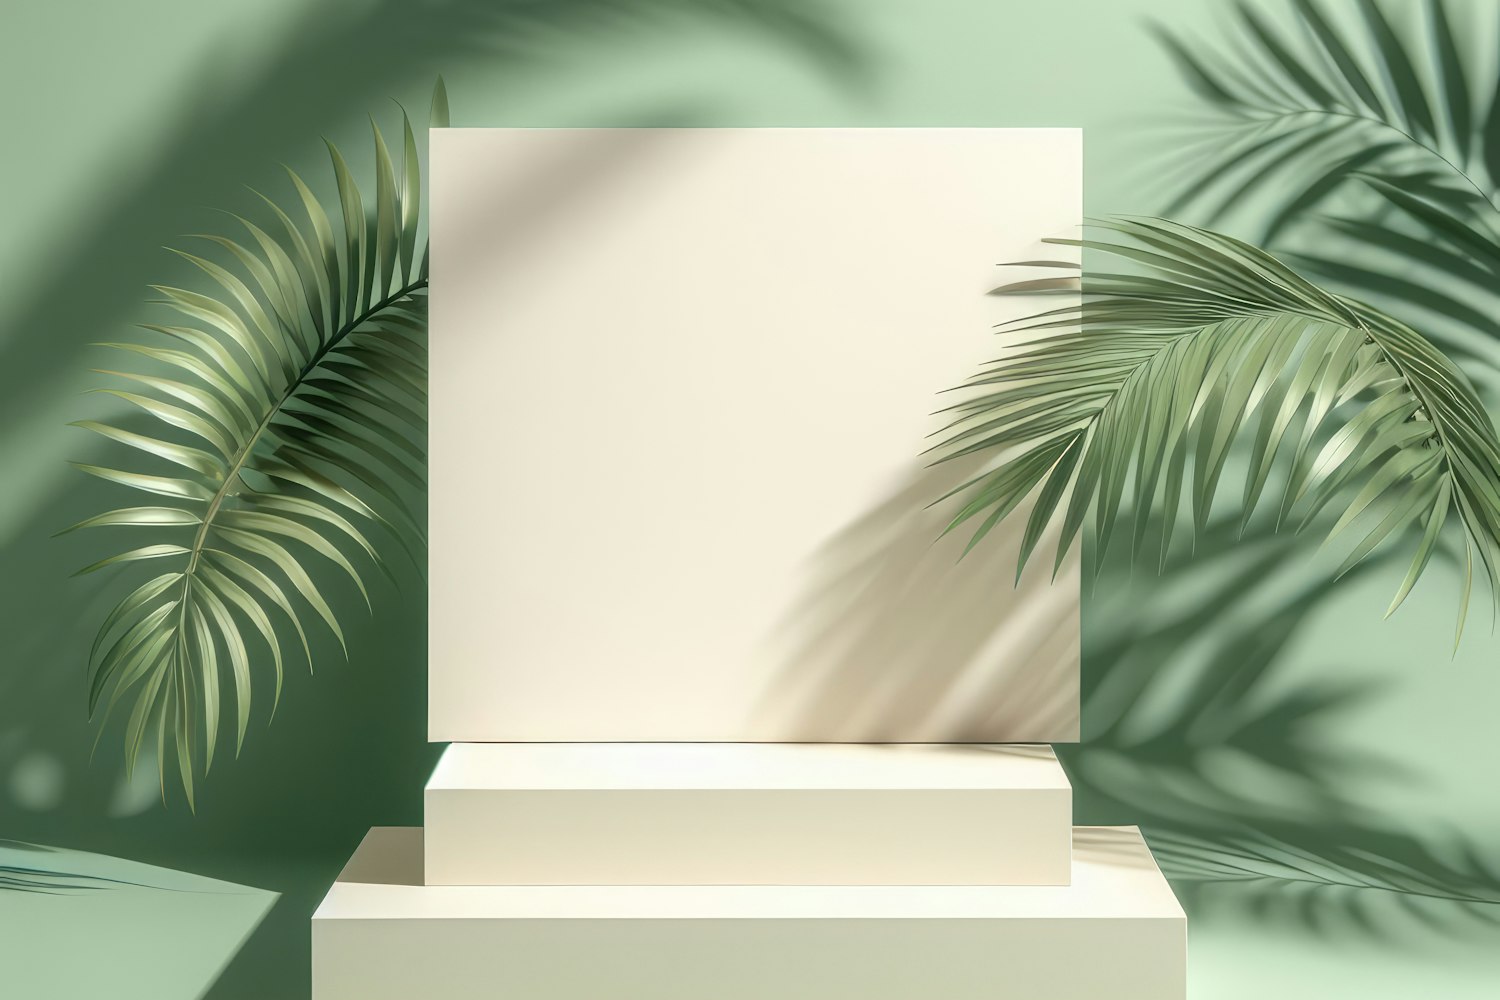 Minimalist Product Display with Palm Fronds